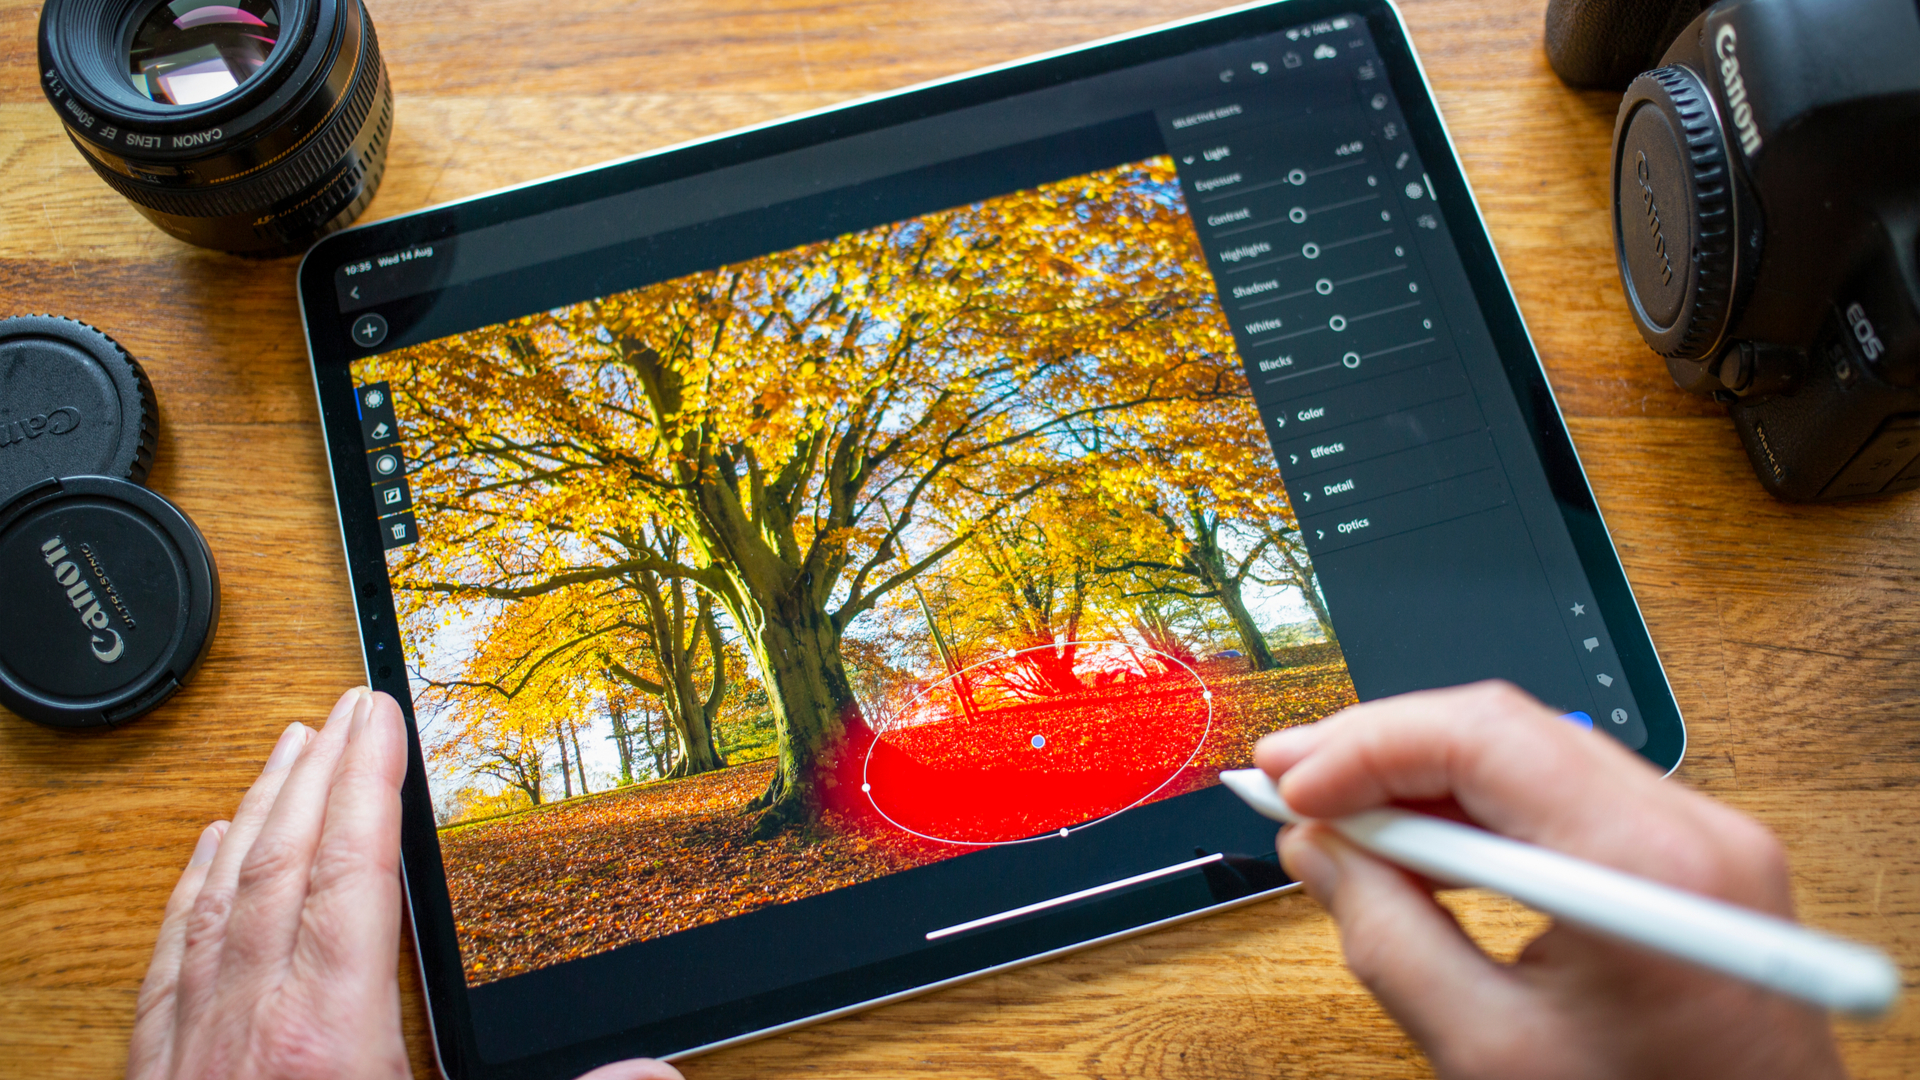 Is the iPad Pro worth it for photo editing?